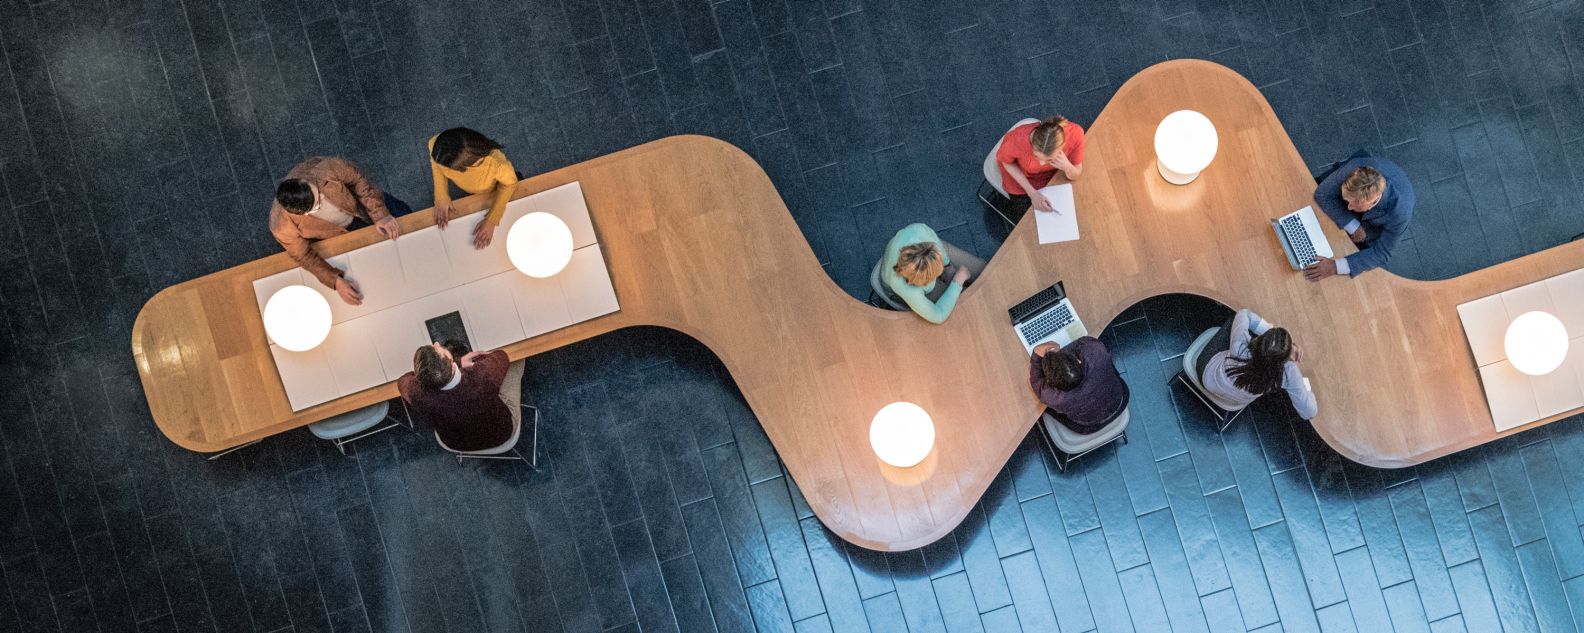 Overhead view of employees sitting at large zigzag meeting table